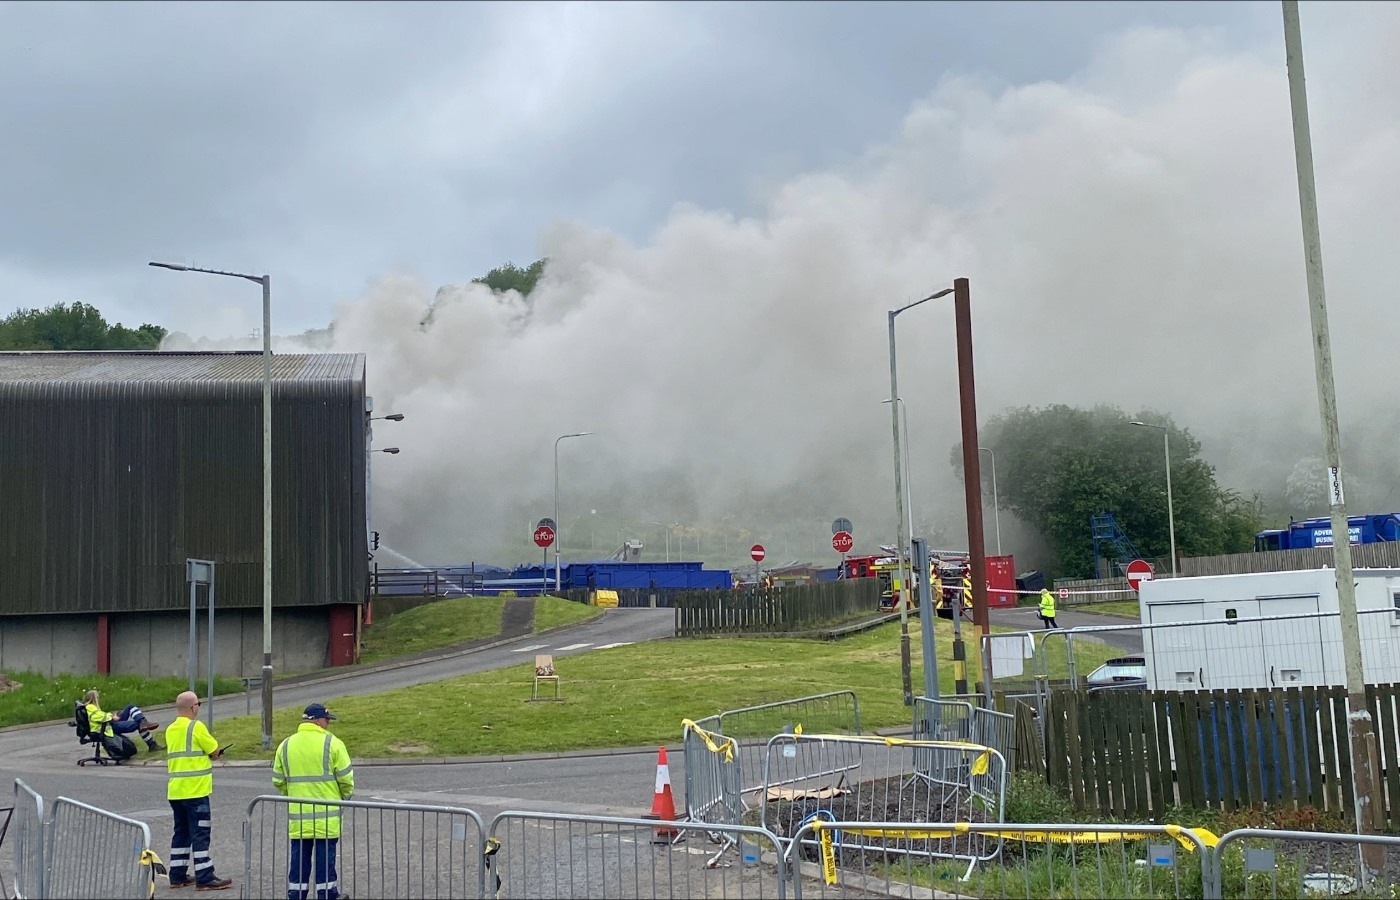 No one was injured as as a result of the fire at the recycling centre. 